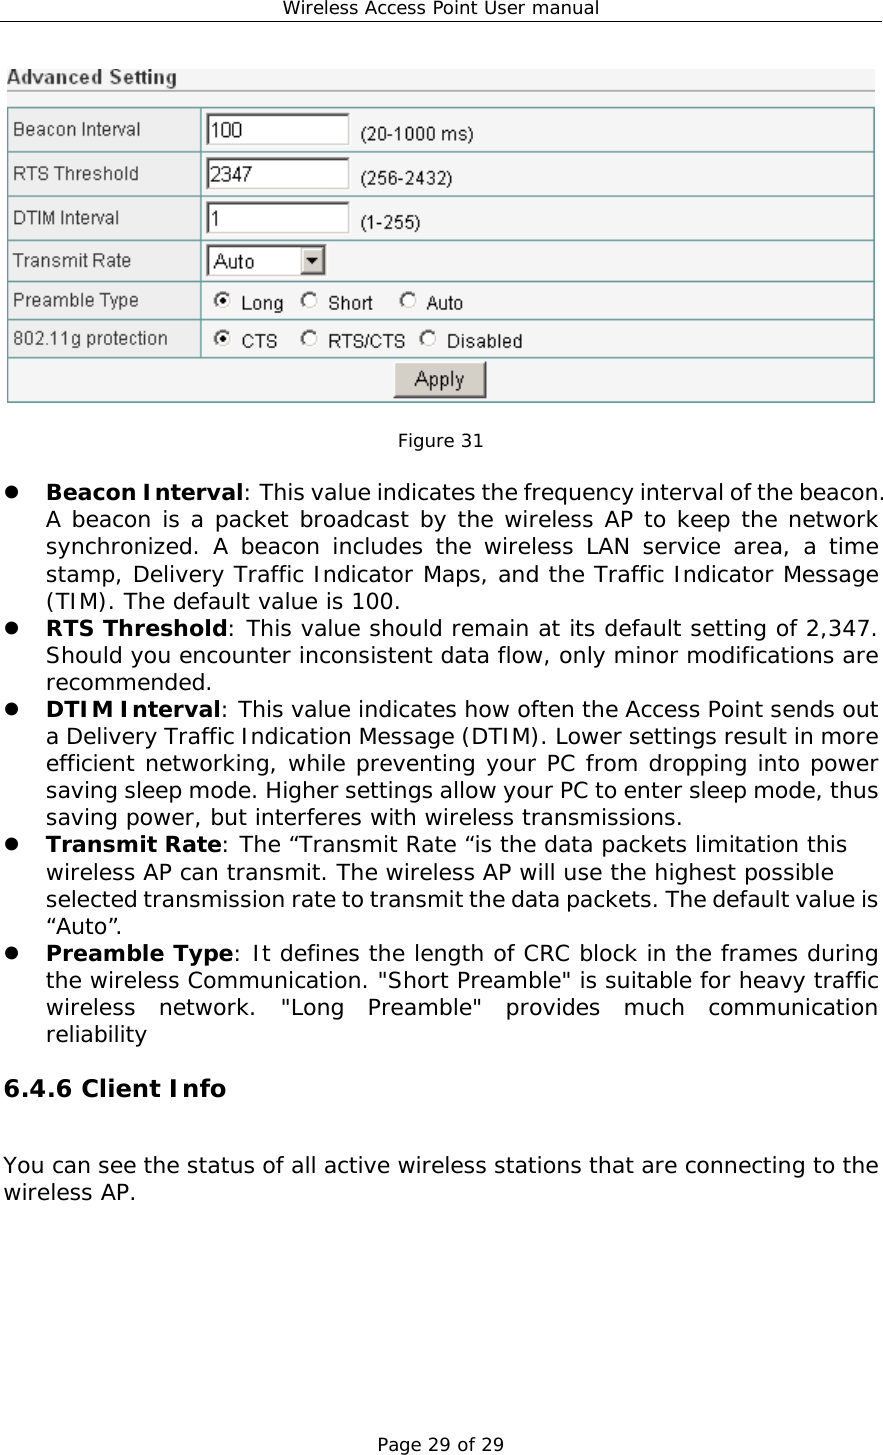 Wireless Access Point User manual Page 29 of 29   Figure 31    Beacon Interval: This value indicates the frequency interval of the beacon. A beacon is a packet broadcast by the wireless AP to keep the network synchronized. A beacon includes the wireless LAN service area, a time stamp, Delivery Traffic Indicator Maps, and the Traffic Indicator Message (TIM). The default value is 100.   RTS Threshold: This value should remain at its default setting of 2,347. Should you encounter inconsistent data flow, only minor modifications are recommended.   DTIM Interval: This value indicates how often the Access Point sends out a Delivery Traffic Indication Message (DTIM). Lower settings result in more efficient networking, while preventing your PC from dropping into power saving sleep mode. Higher settings allow your PC to enter sleep mode, thus saving power, but interferes with wireless transmissions.    Transmit Rate: The “Transmit Rate “is the data packets limitation this wireless AP can transmit. The wireless AP will use the highest possible selected transmission rate to transmit the data packets. The default value is “Auto”.   Preamble Type: It defines the length of CRC block in the frames during the wireless Communication. &quot;Short Preamble&quot; is suitable for heavy traffic wireless network. &quot;Long Preamble&quot; provides much communication reliability  6.4.6 Client Info You can see the status of all active wireless stations that are connecting to the wireless AP.   